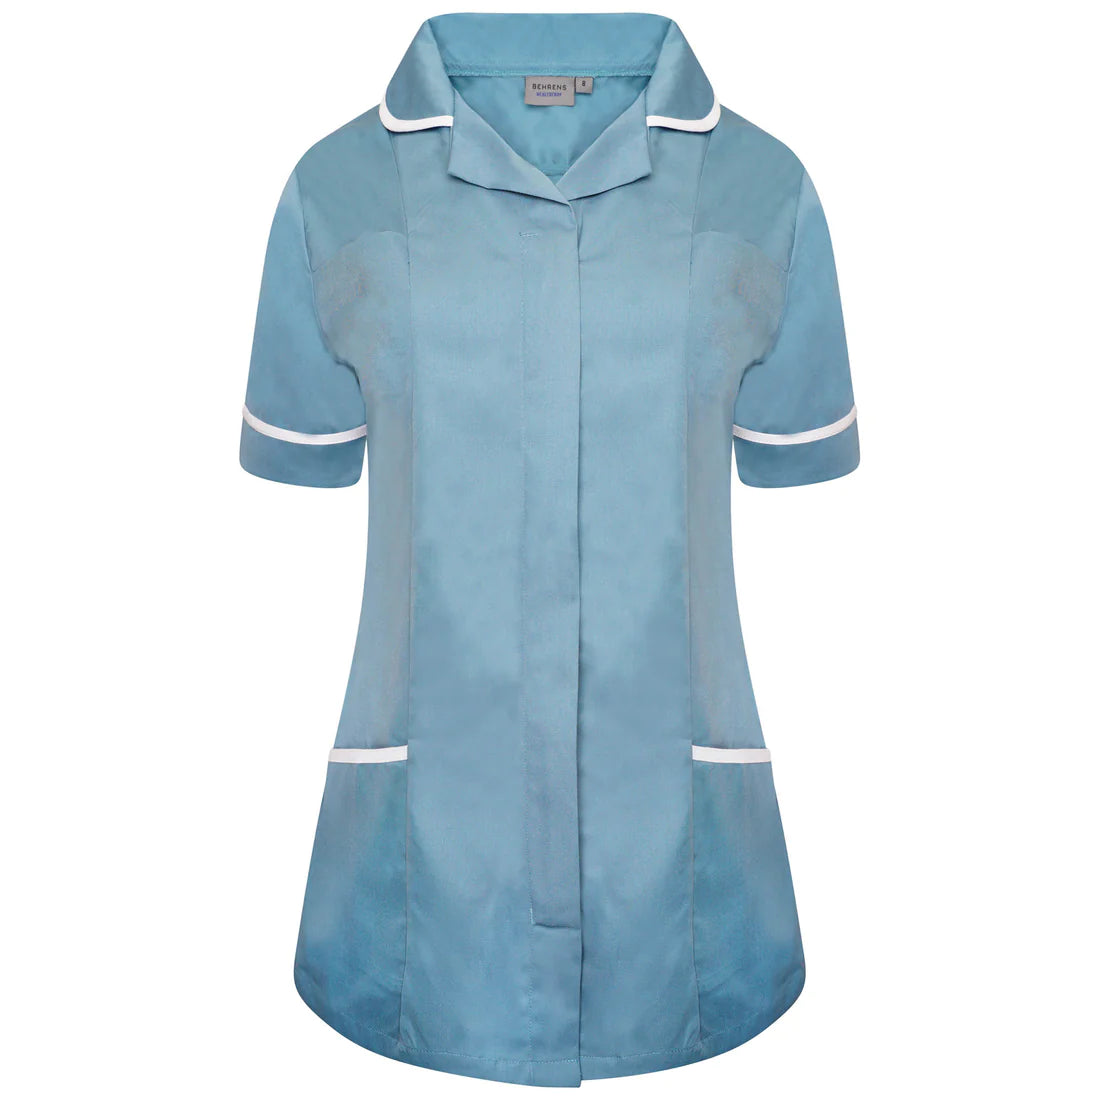 Teal/White Contrast Ladies Tunic with Round Collar - NCLTPS